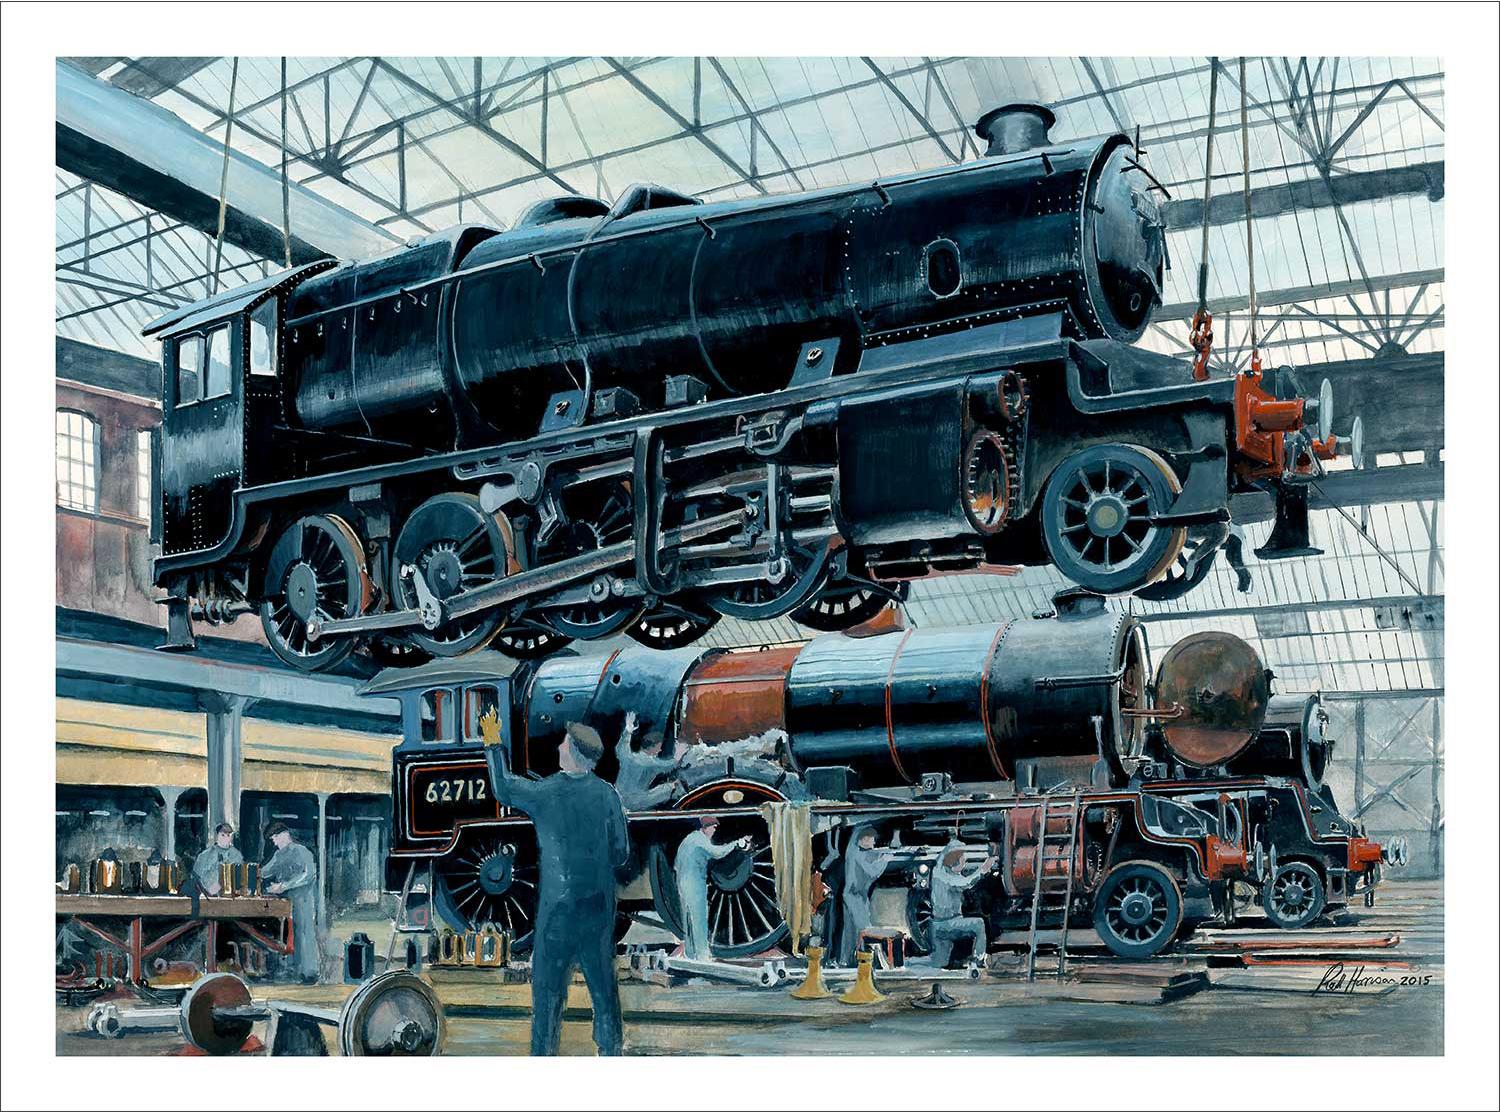 Bo’ness Locomotive Works Art Print from an original painted by artist Rod Harrison